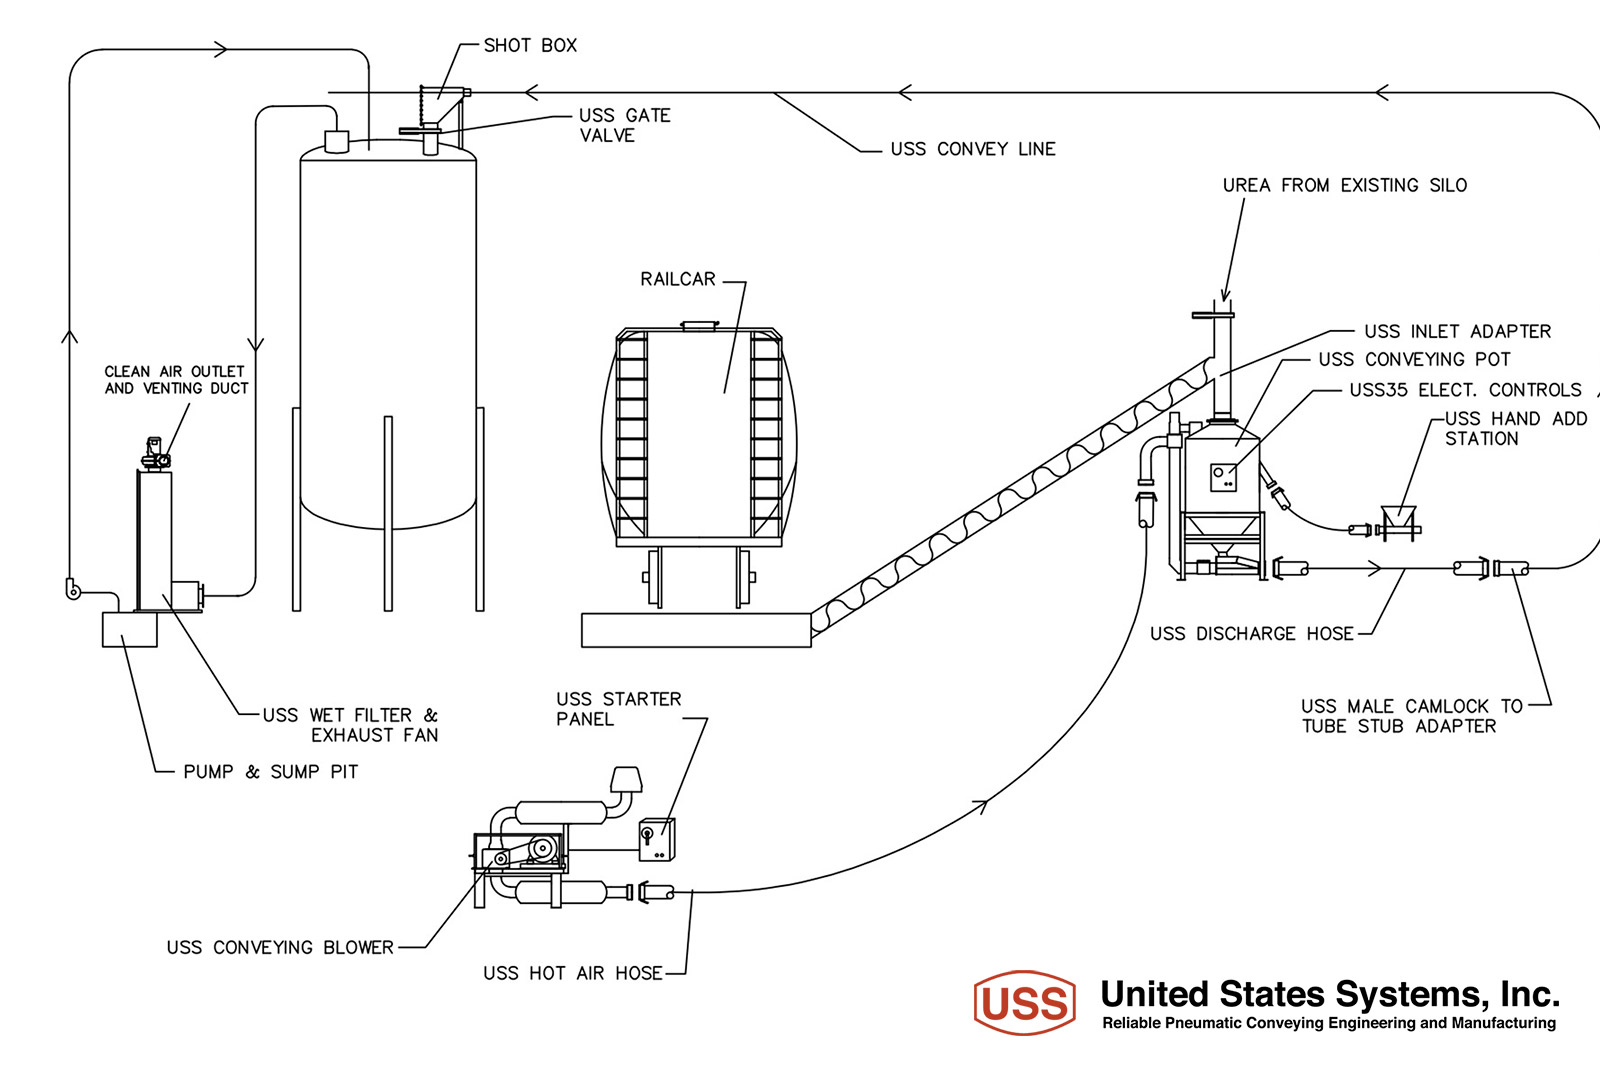 Process Diagrams | US SYSTEMS